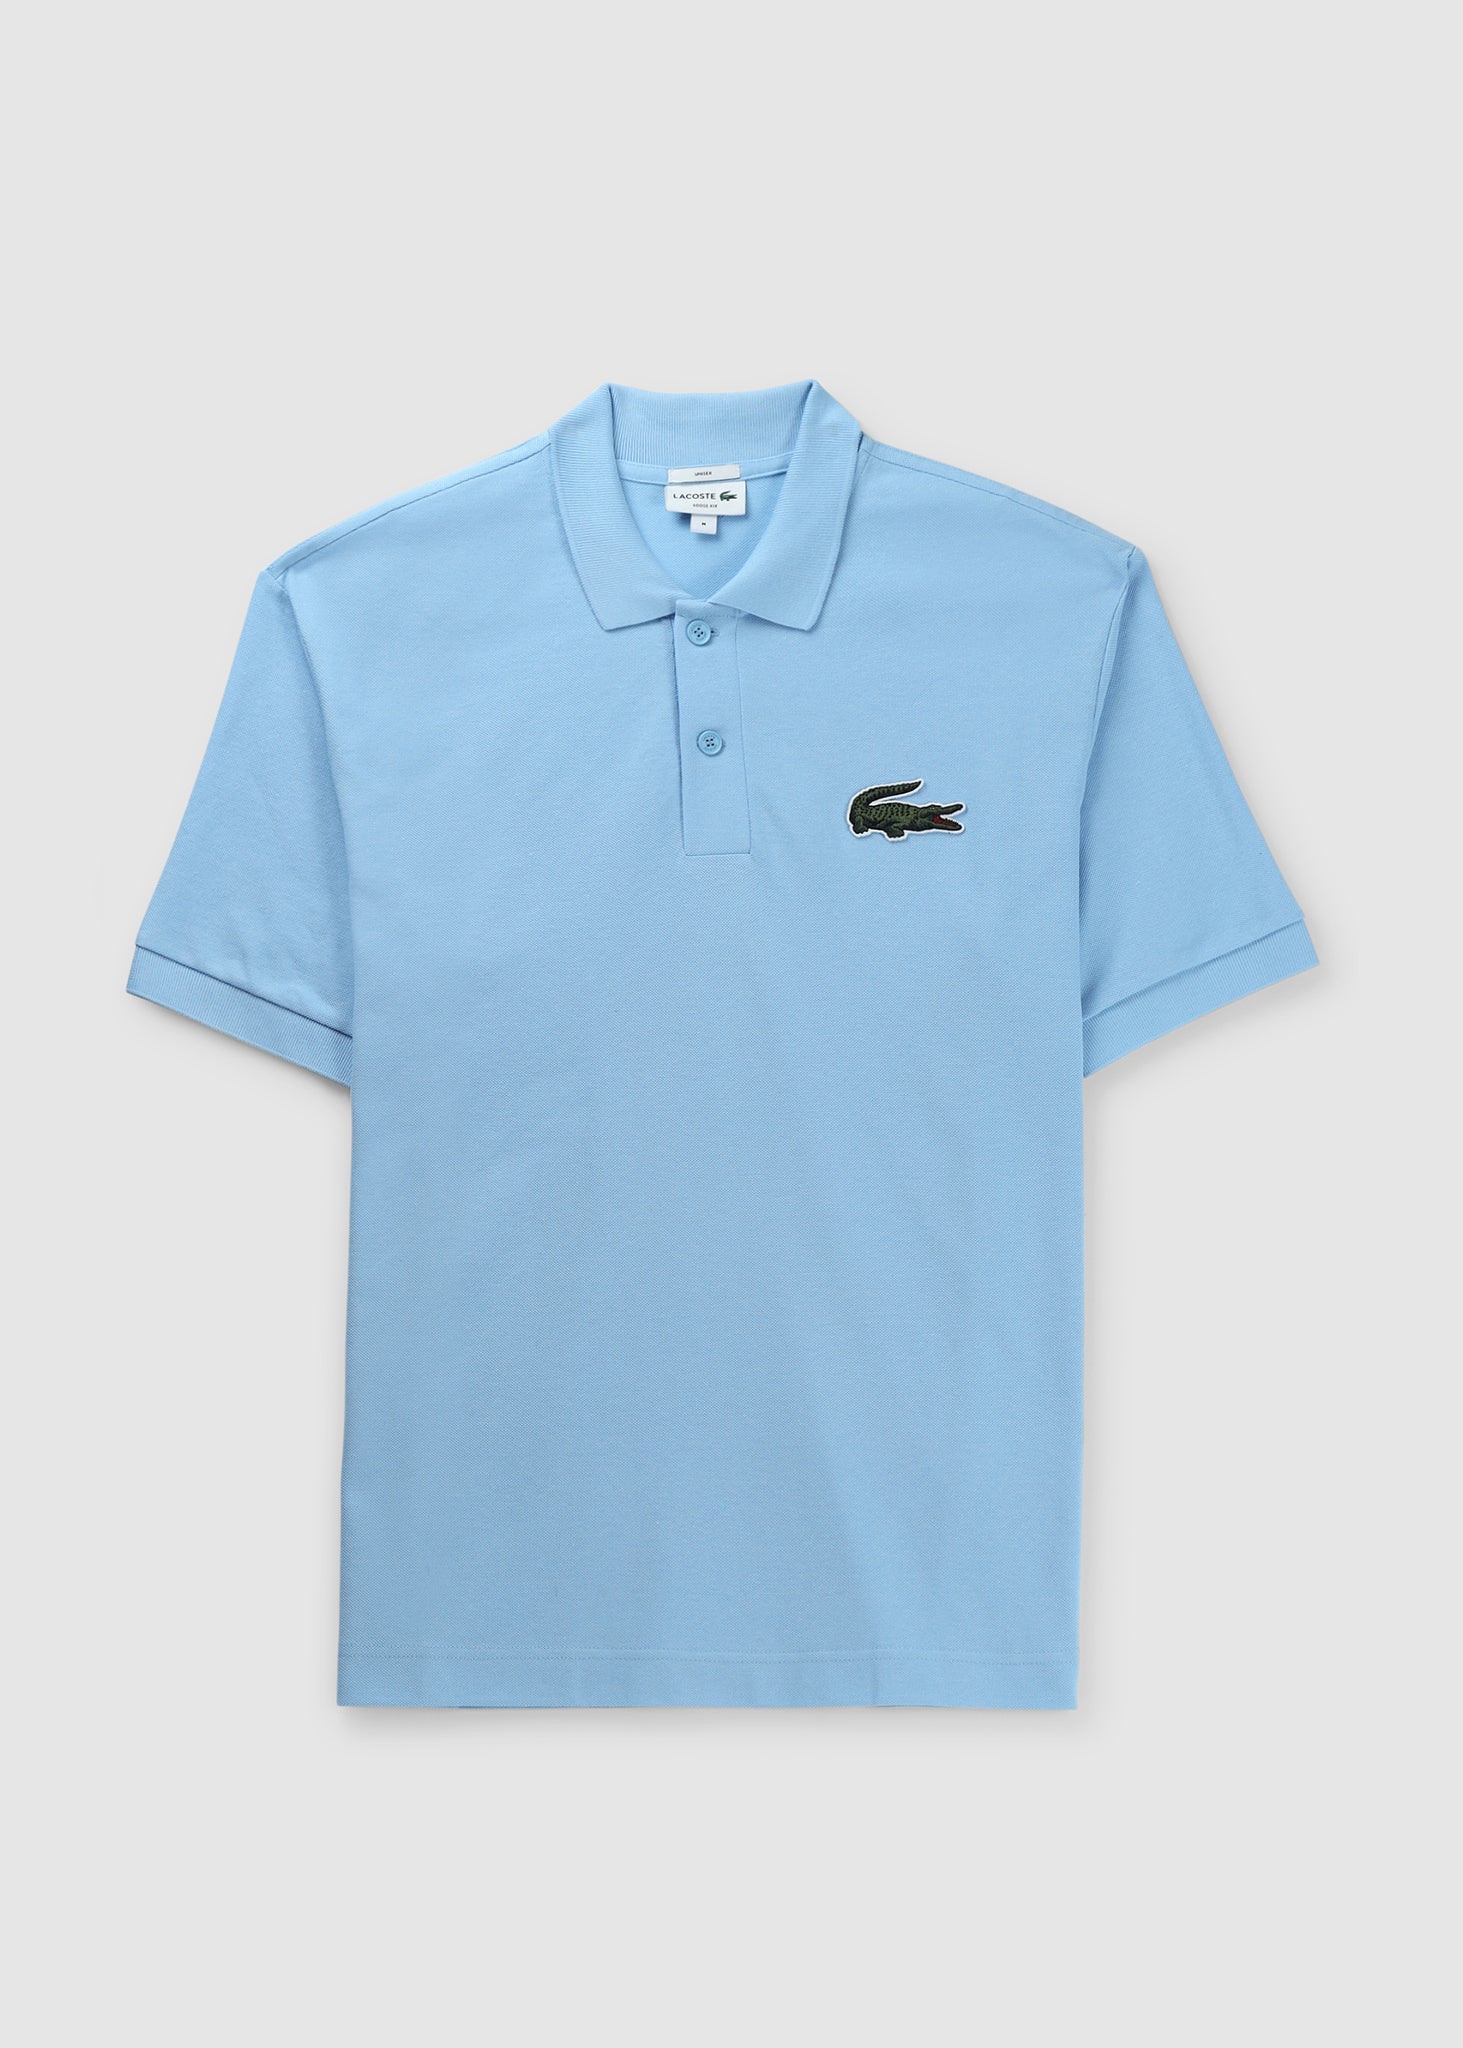 Image of Lacoste Mens Large Croc Polo In Blue